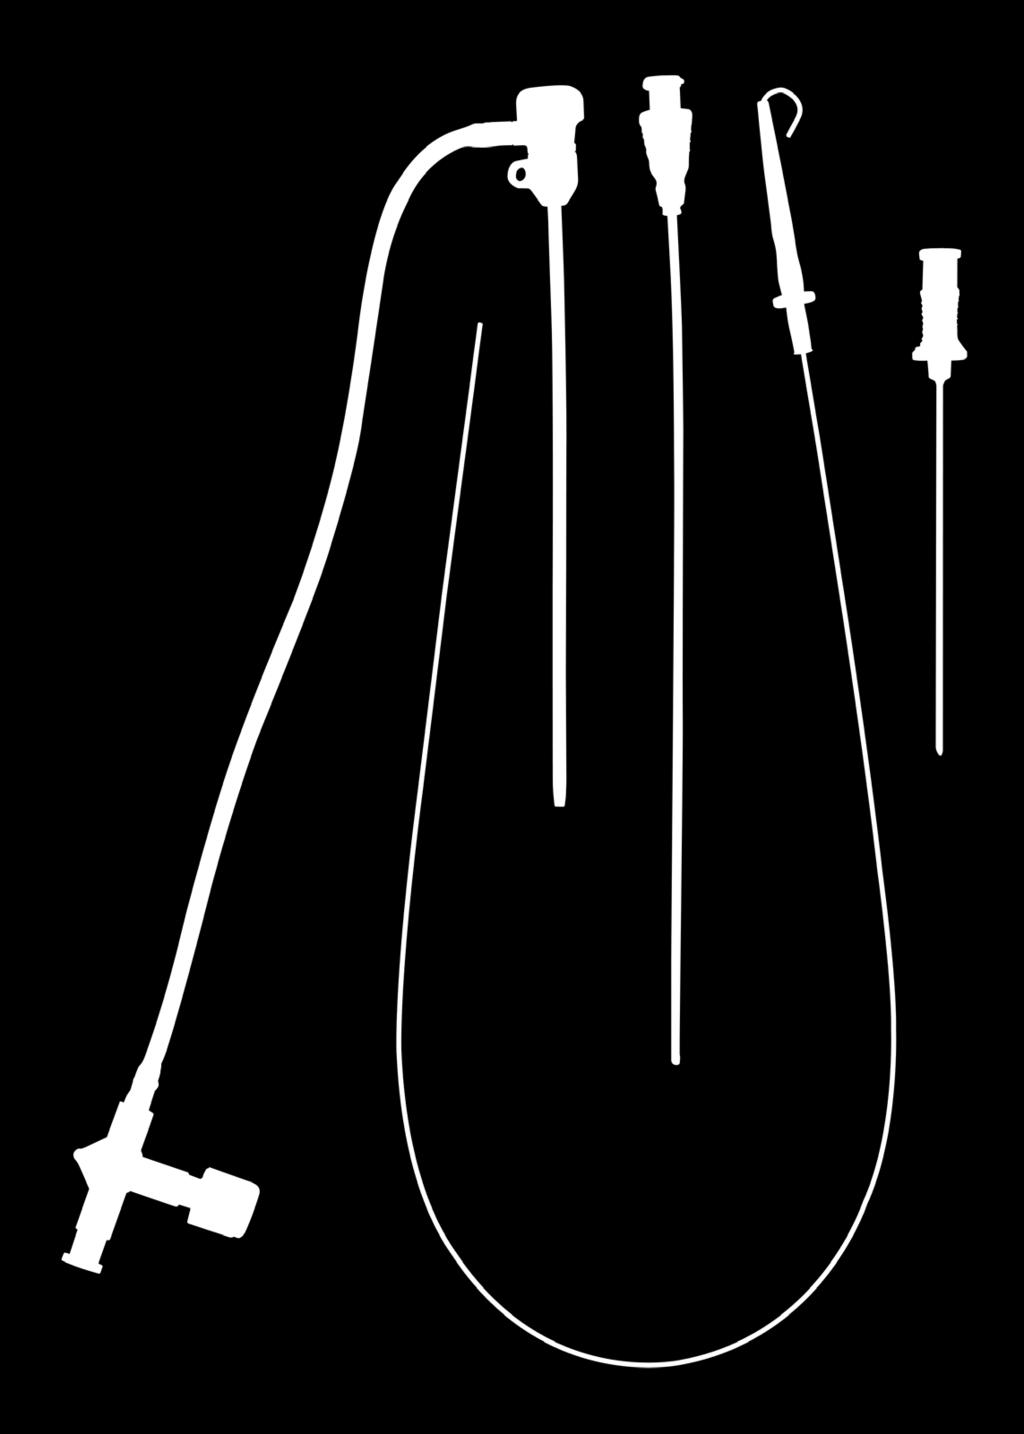 PRELUDE SHEATH INTRODUCERS WITH MERIT ADVANCE ANGIOGRAPHIC NEEDLE Provides access needle with sheath introducer, dilator and guide wire.